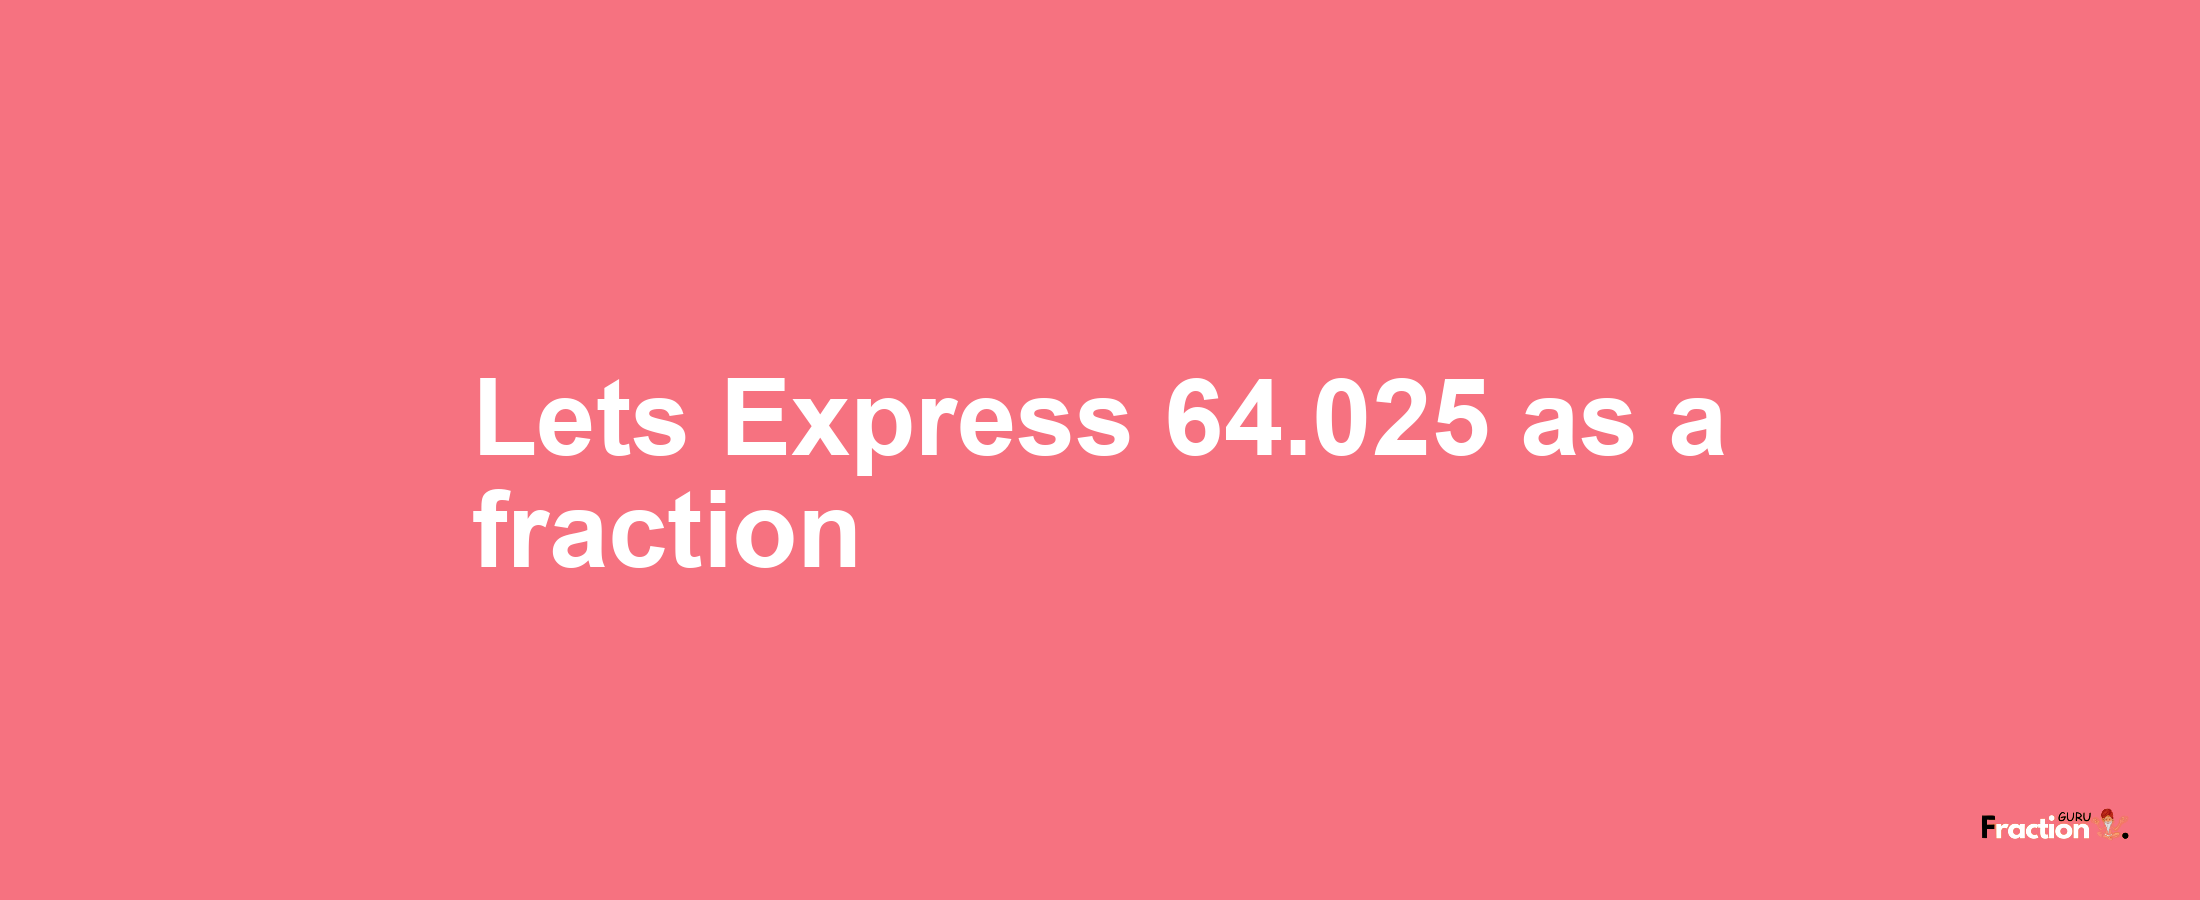 Lets Express 64.025 as afraction